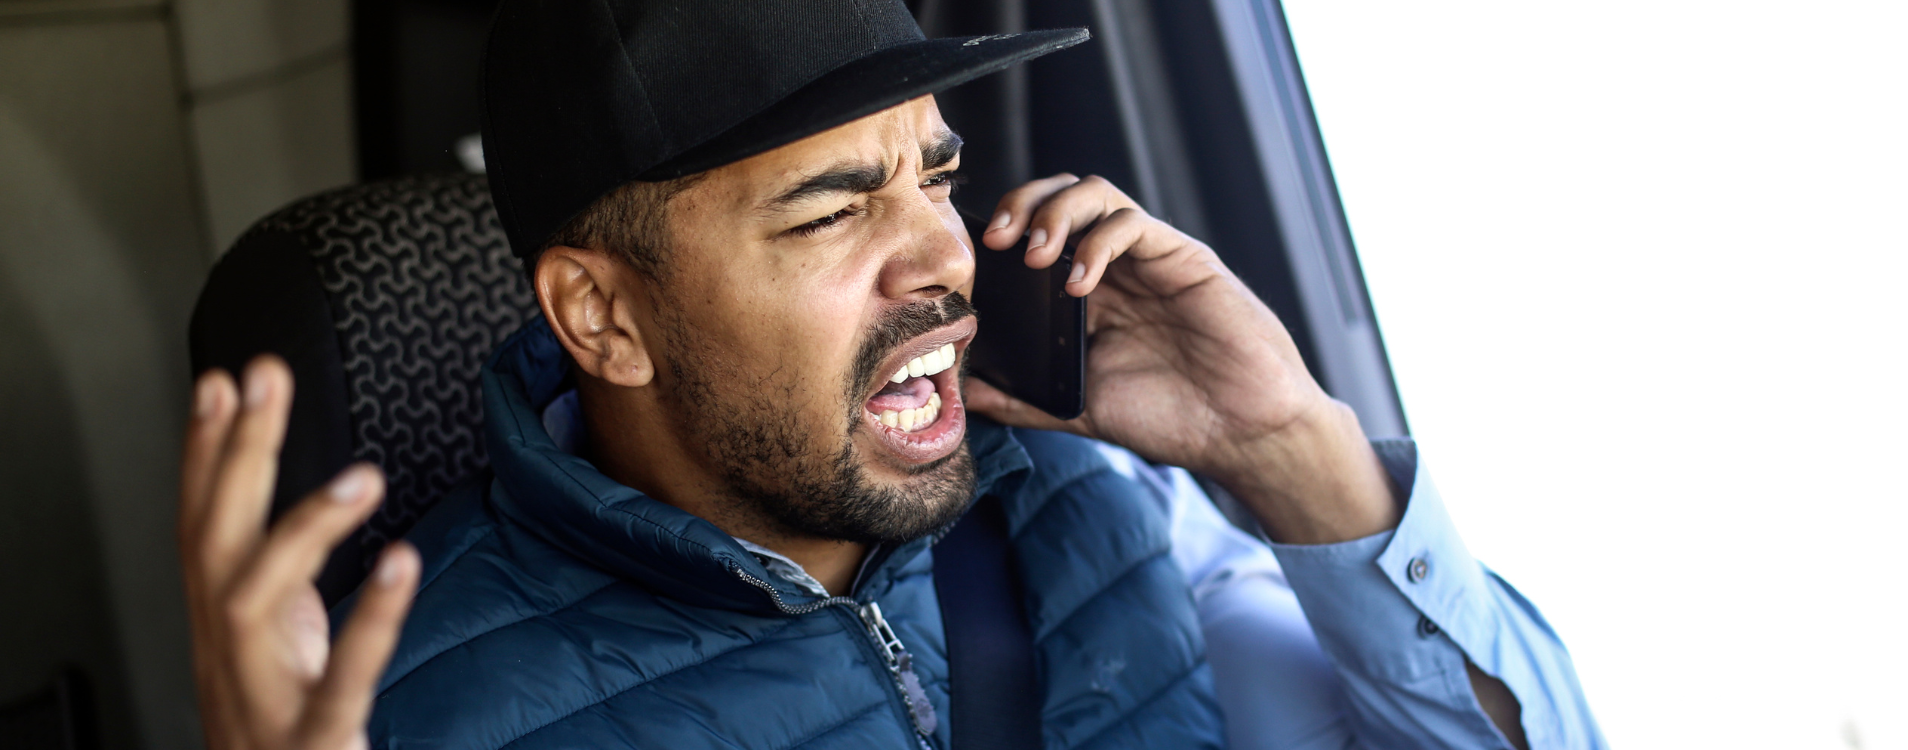 Angry trucker on the phone